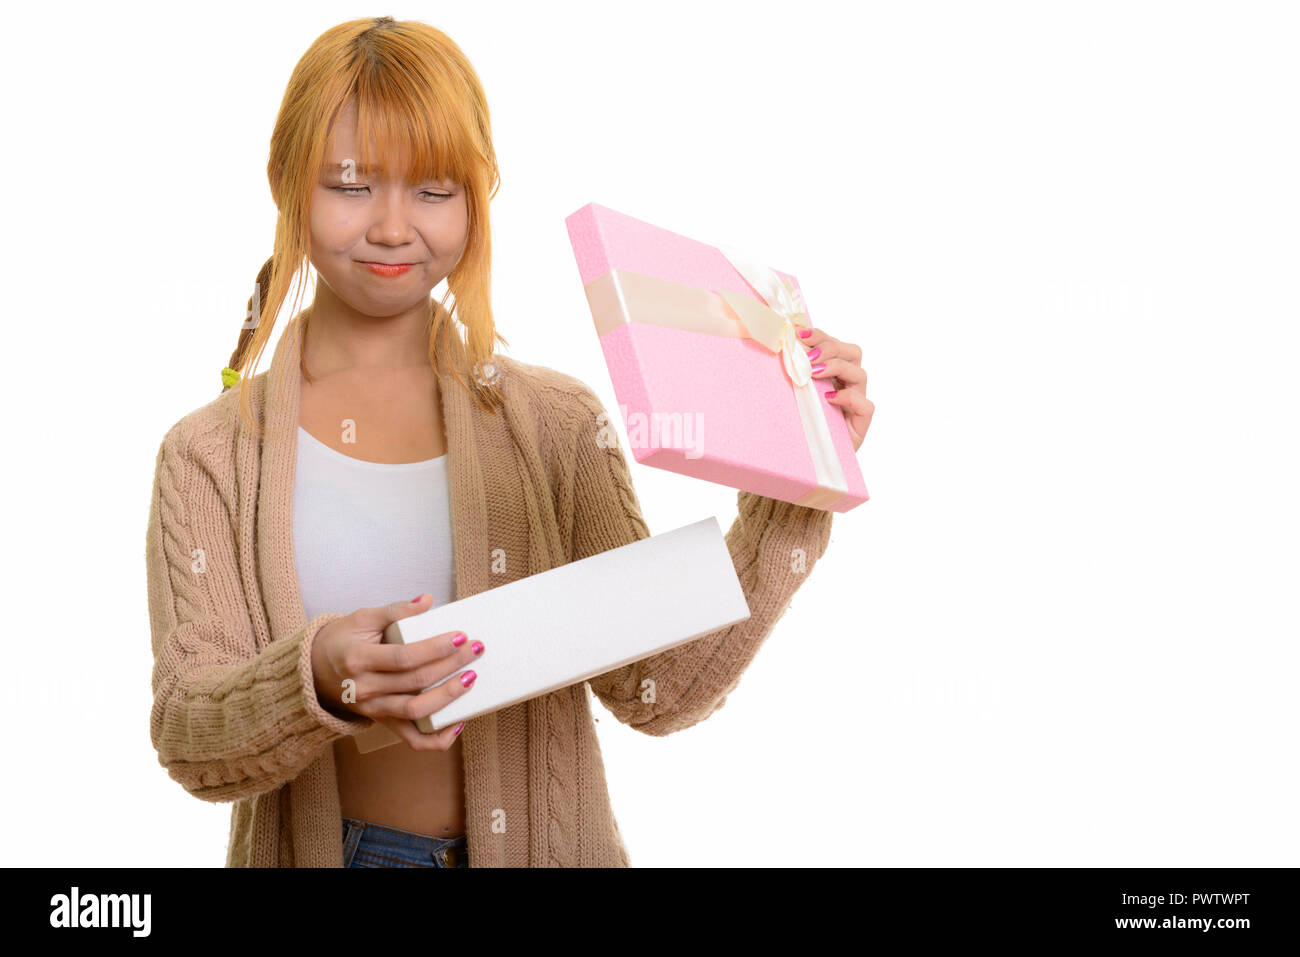 Young cute Asian woman opening gift box looking disappointed Stock Photo